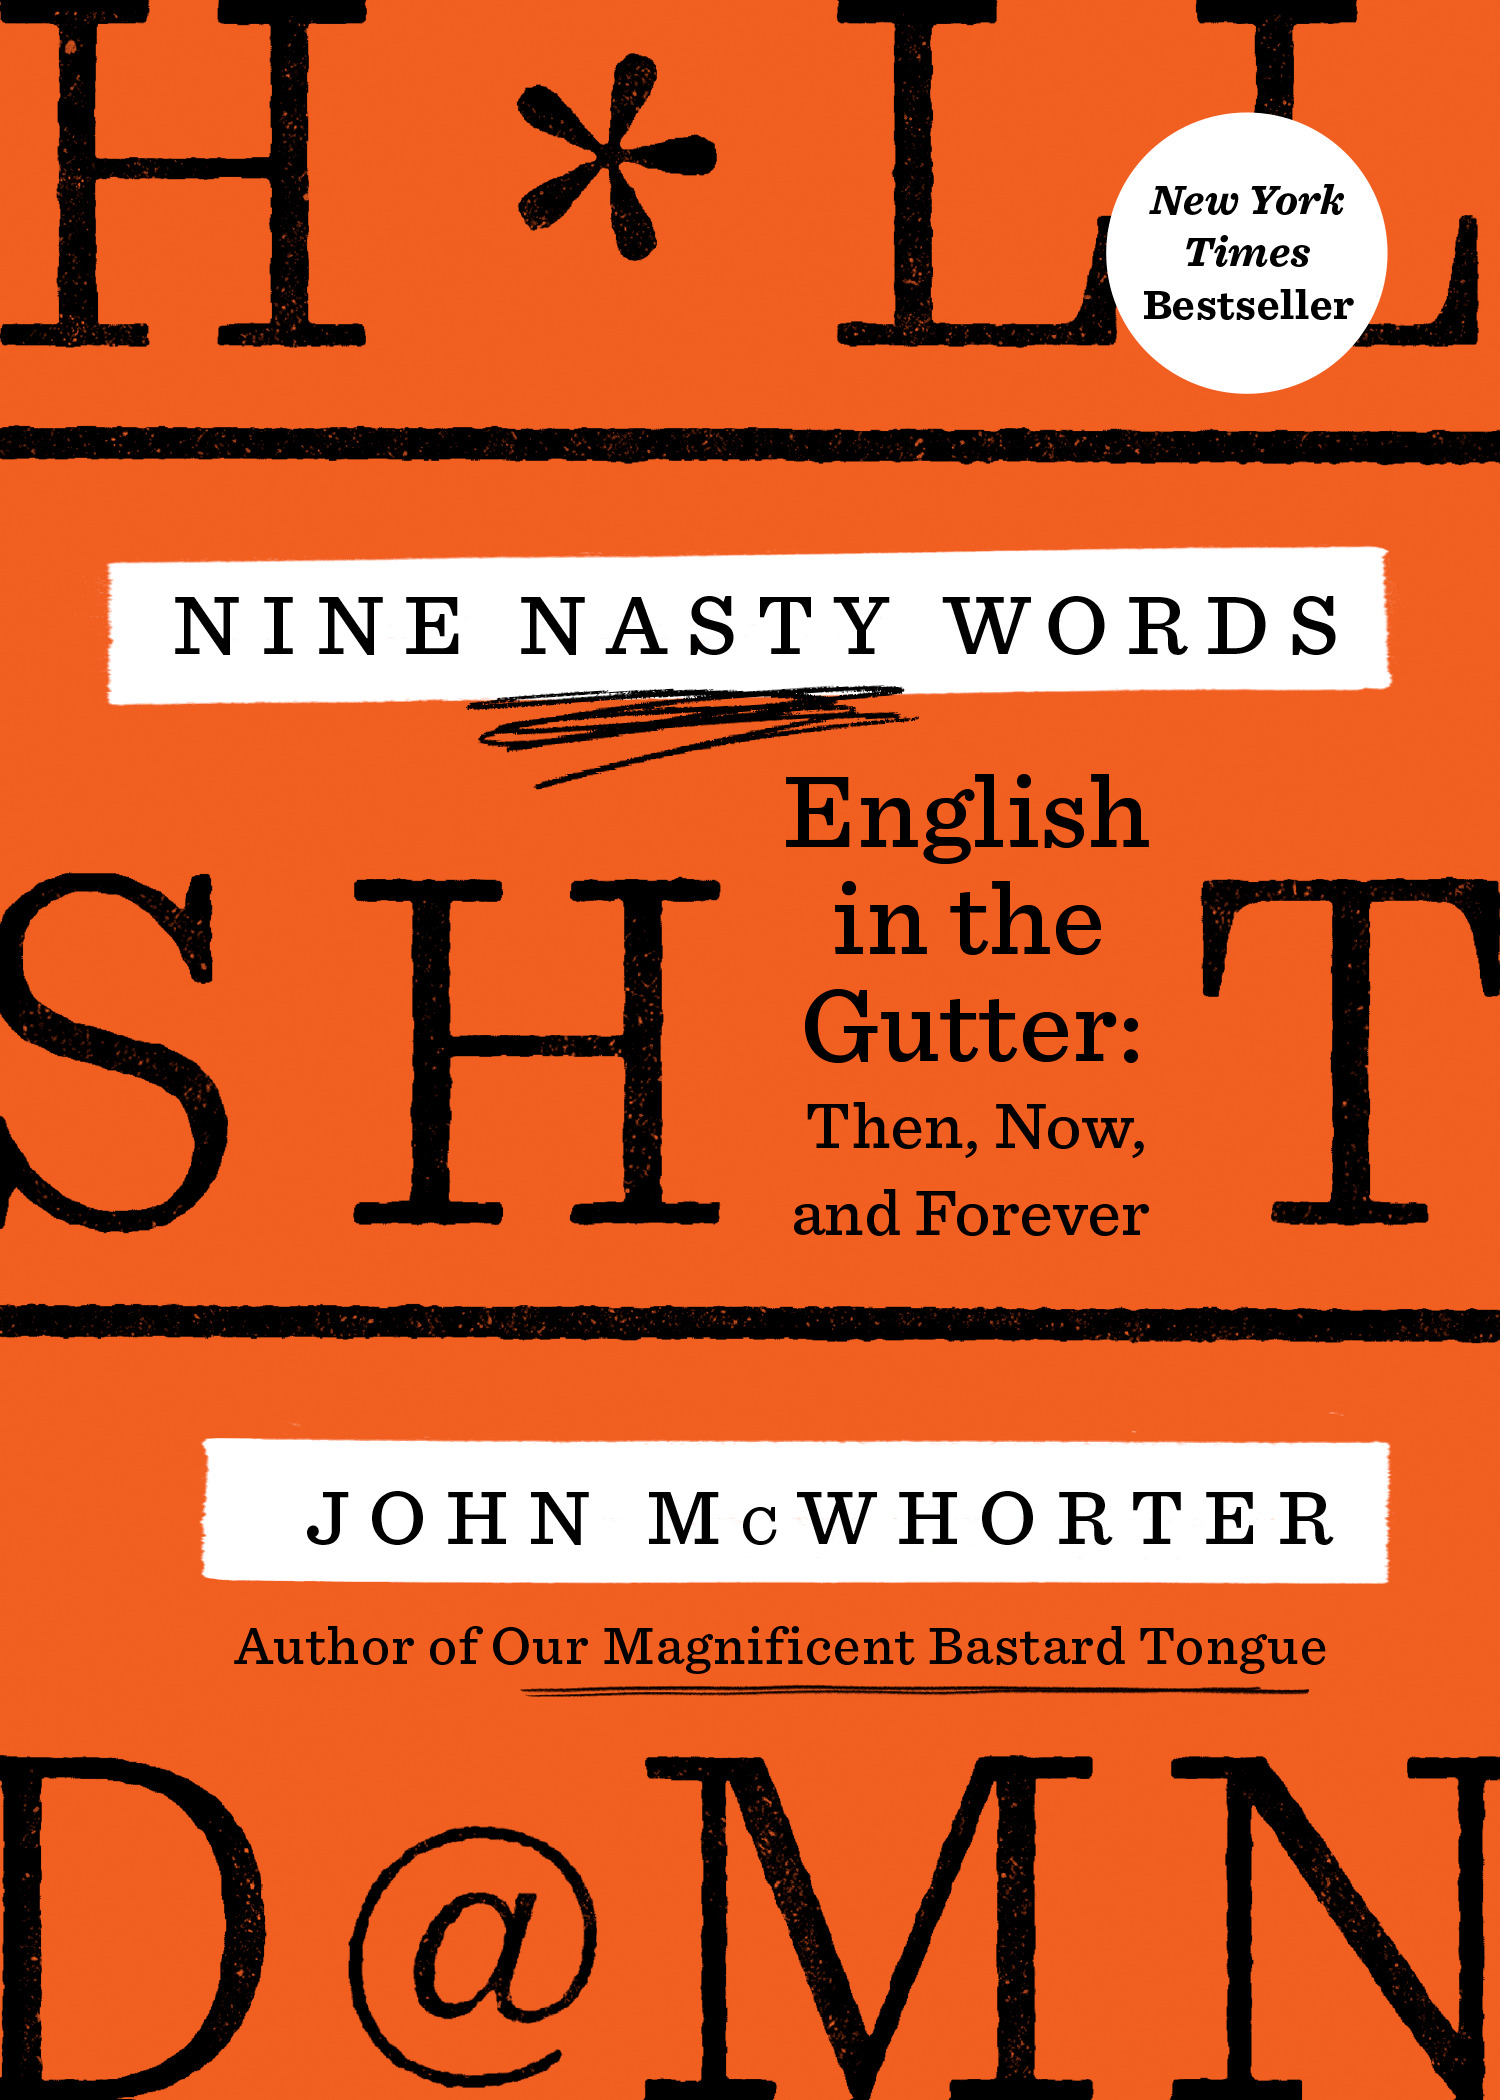 Nine Nasty Words : English in the Gutter: Then, Now, and Forever | McWhorter, John (Auteur)